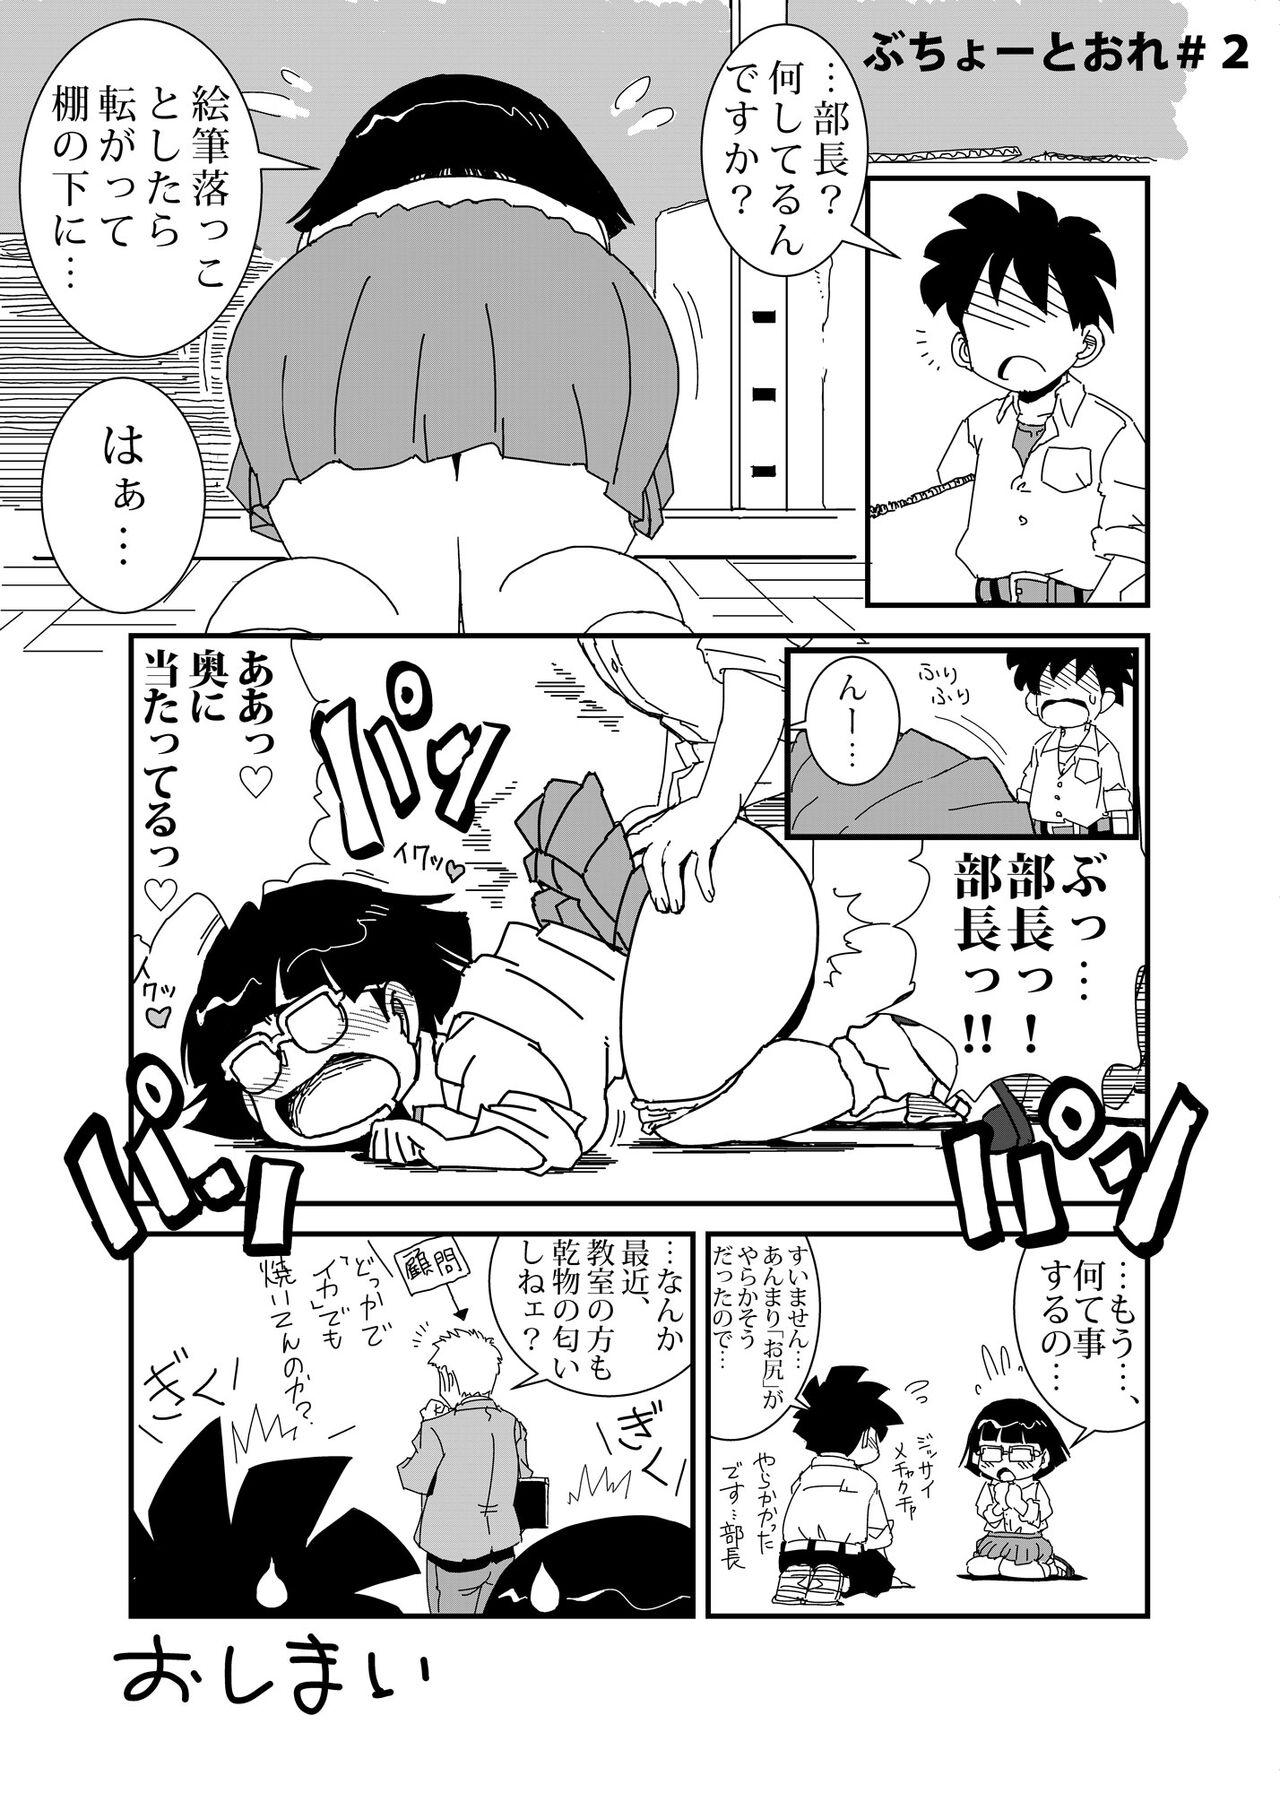 First Time Buchou to Ore - Original Sex - Page 2